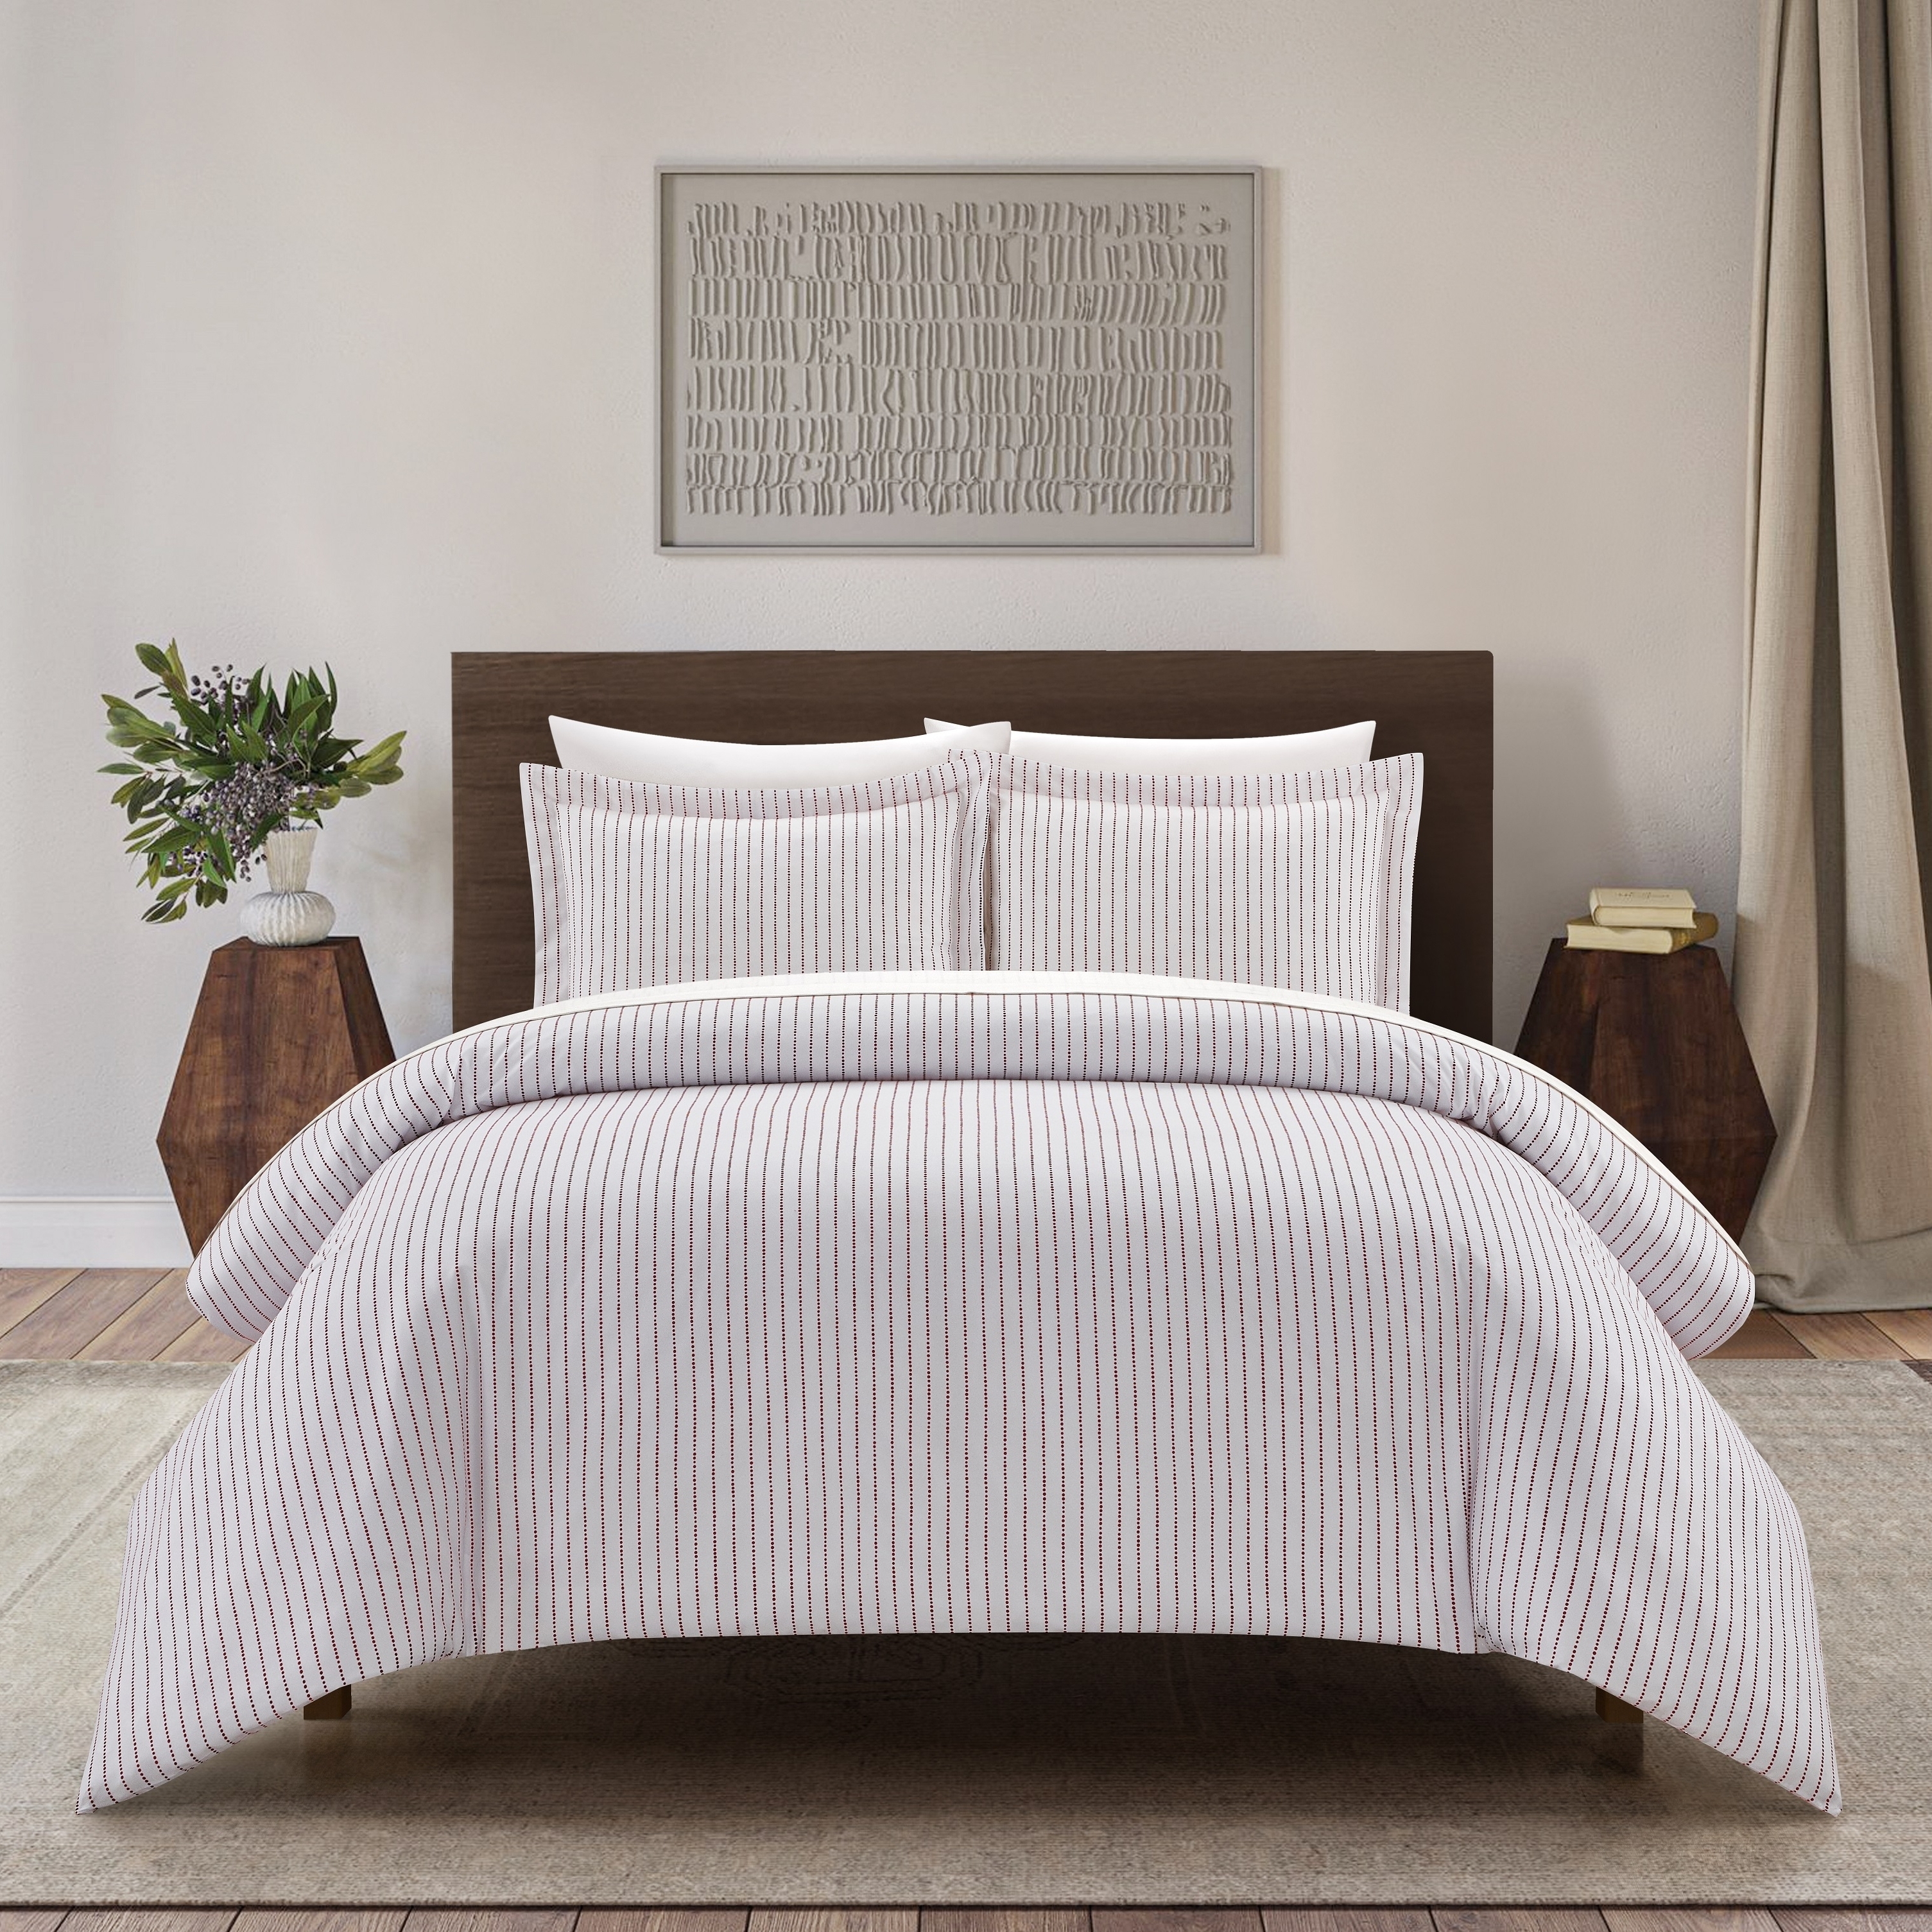 Vasey 2 Or 3 Piece Duvet Cover Set Contemporary Solid White With Dot Striped - Dark Purple, Queen